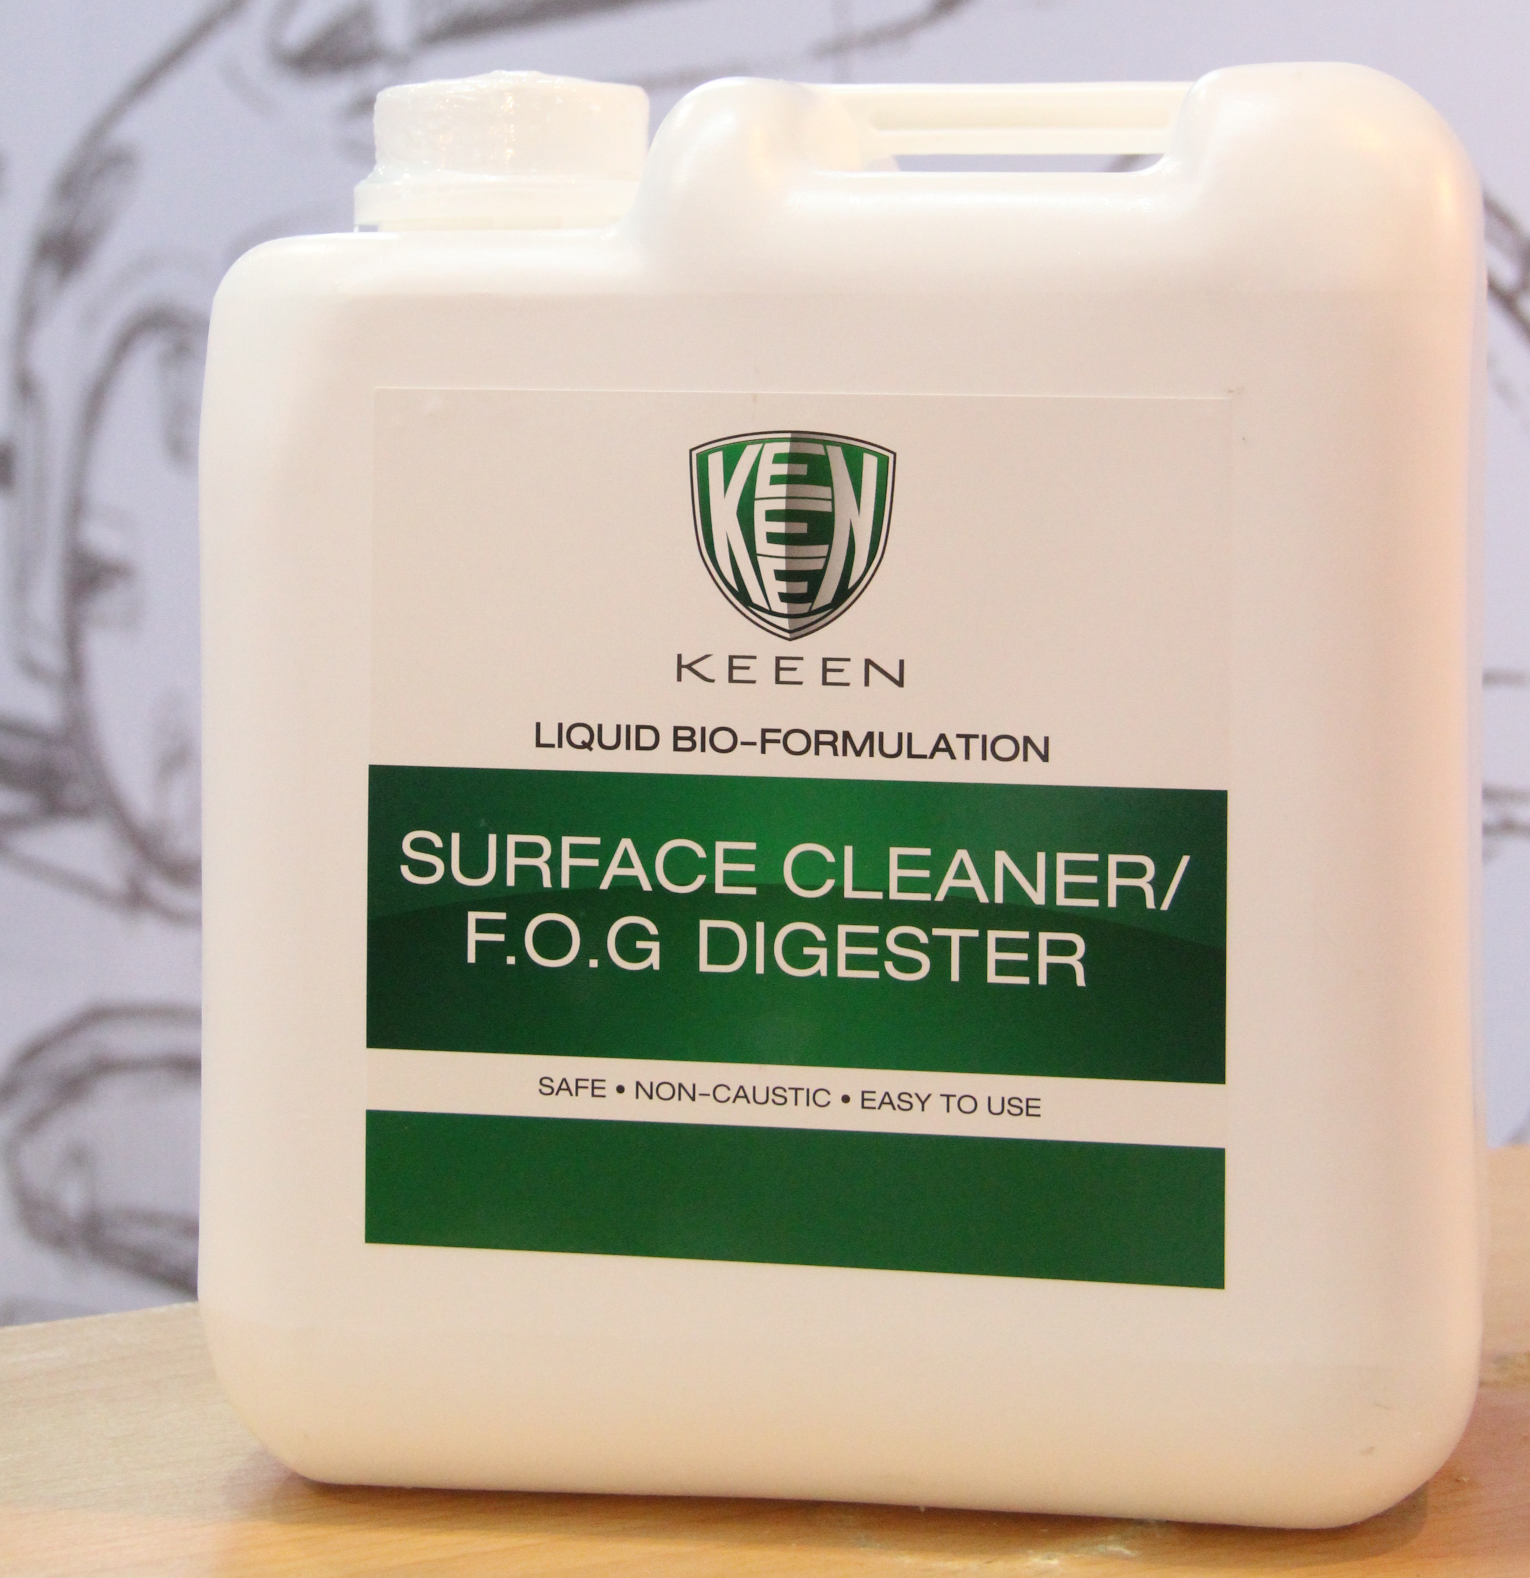 01 - Surface Cleaner - F.O.G Digester*